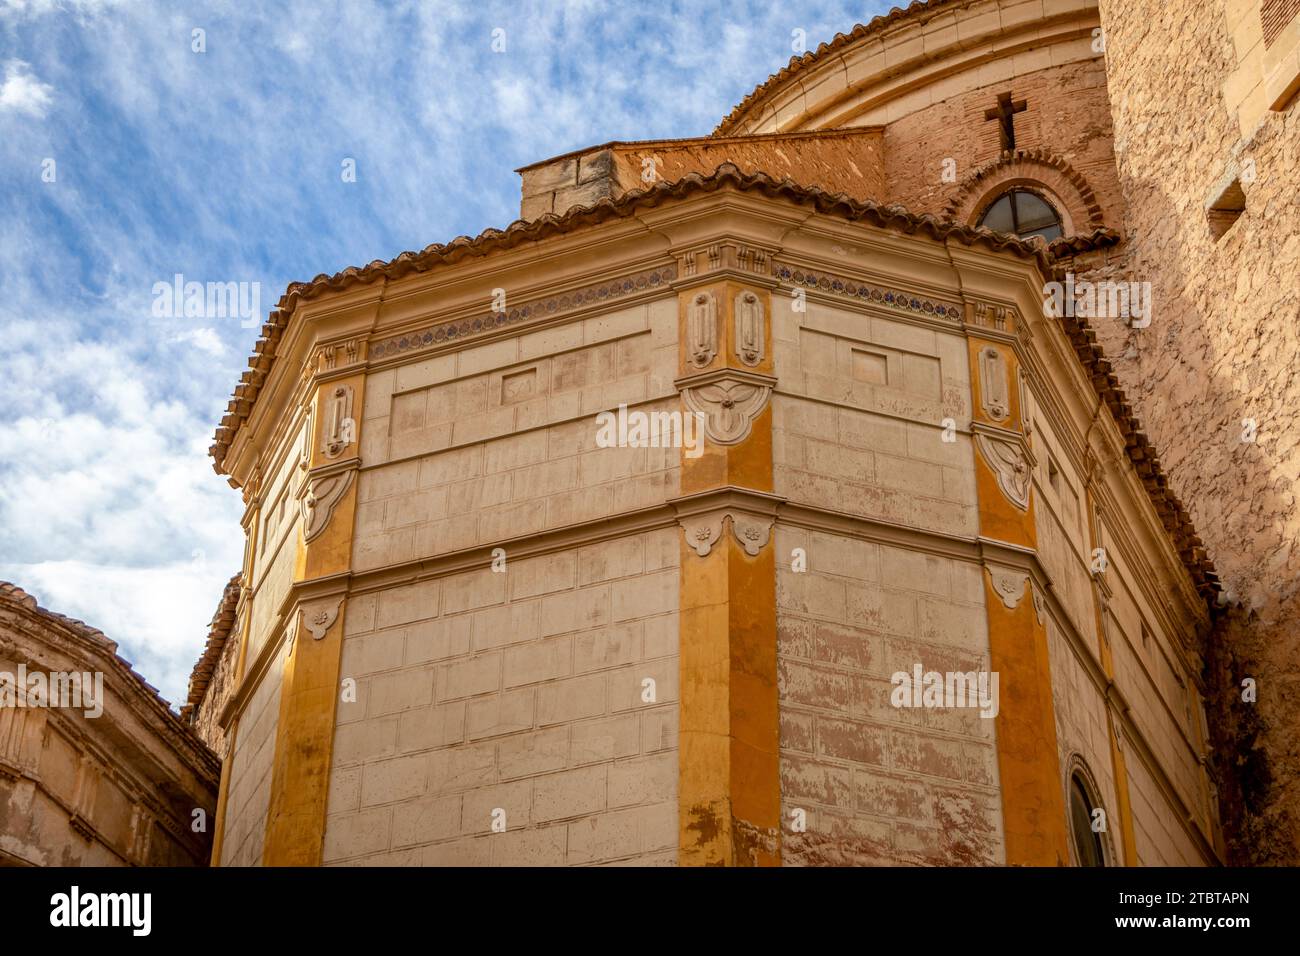 Exterior detail of one of the chapels of the Basilica of the Pursima Concepcion in Yecla, Region of Murcia, Spain Stock Photo